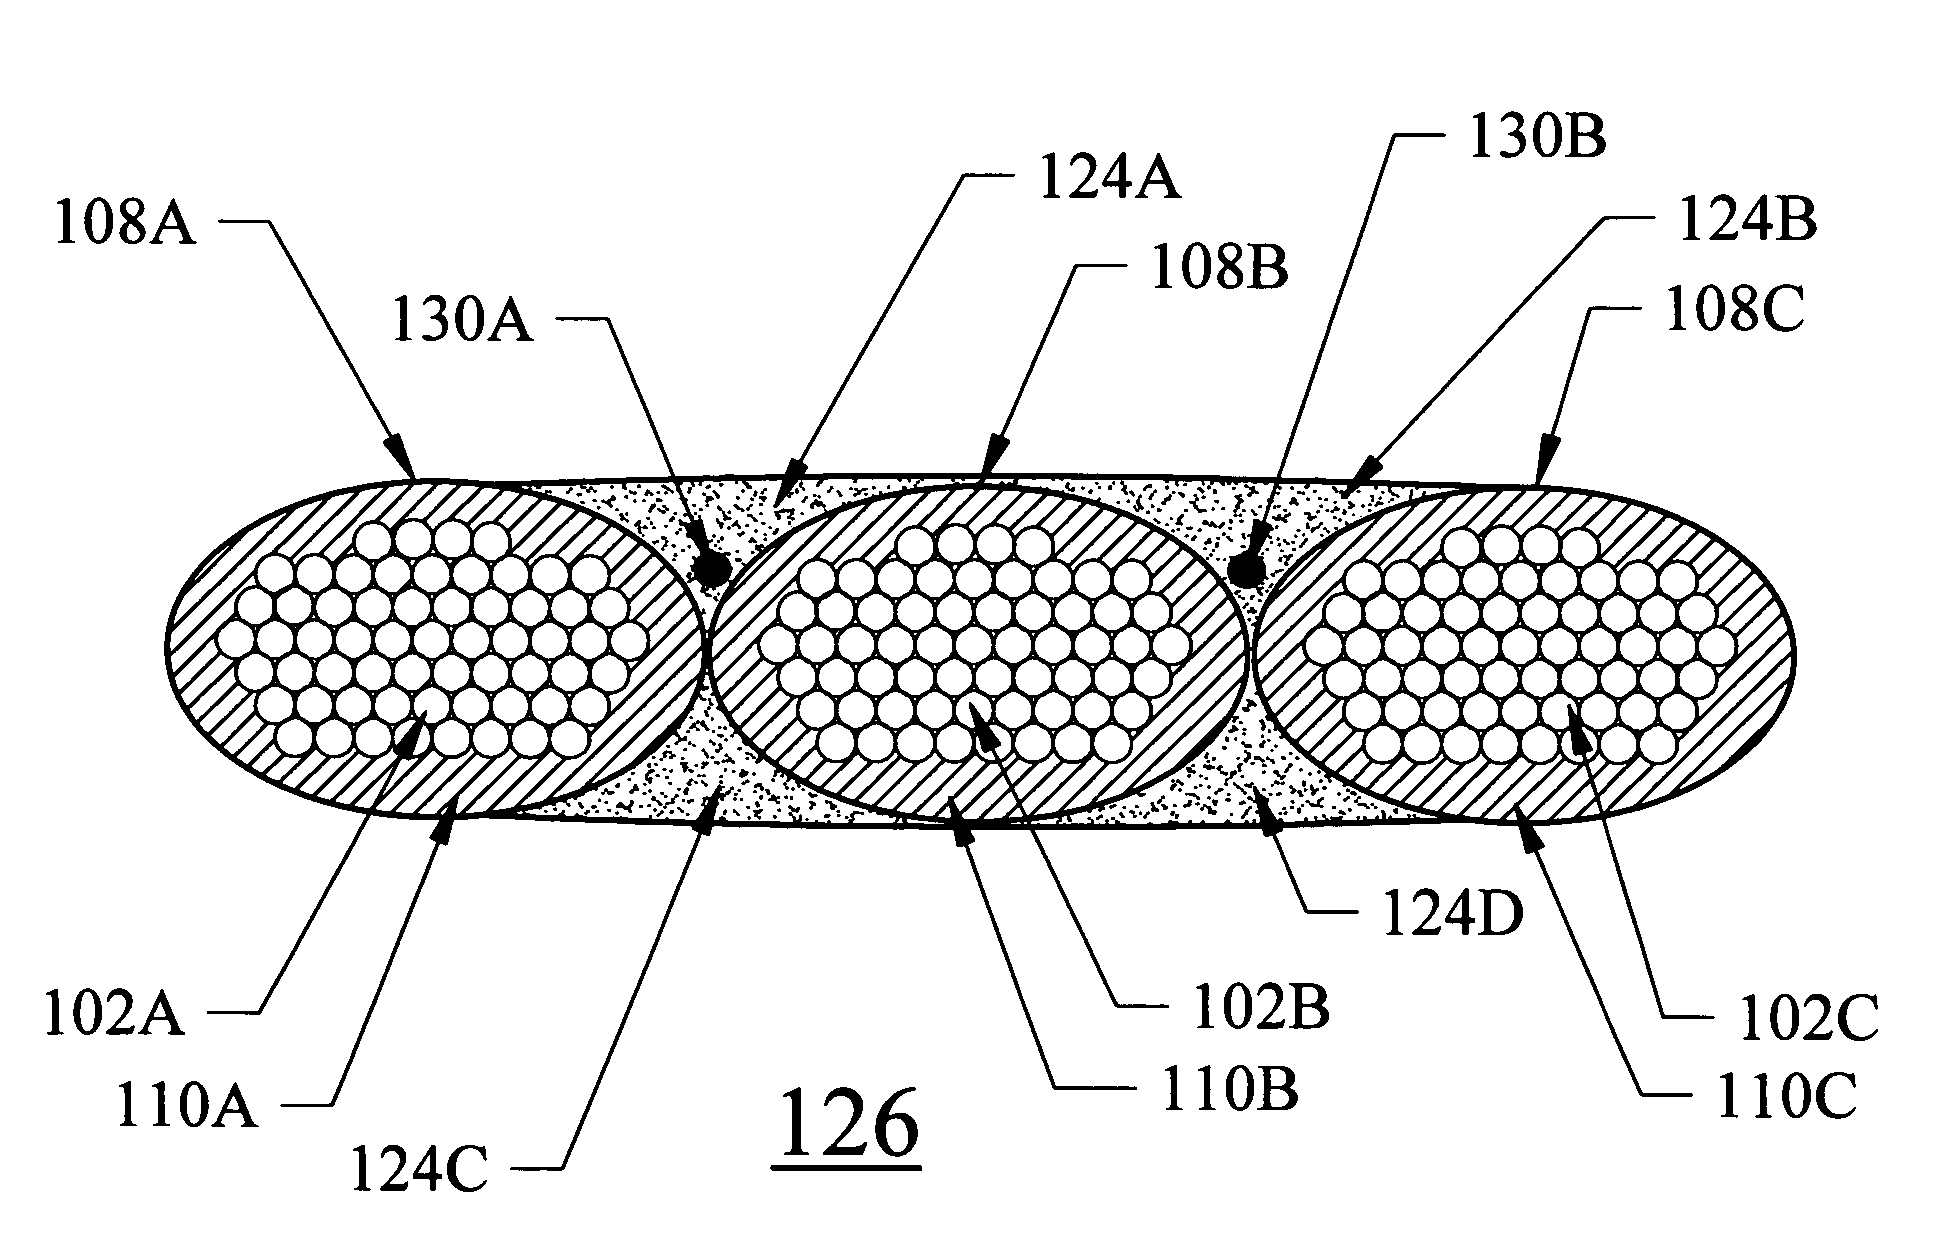 Lifting sling adapted to effectuate cargo security